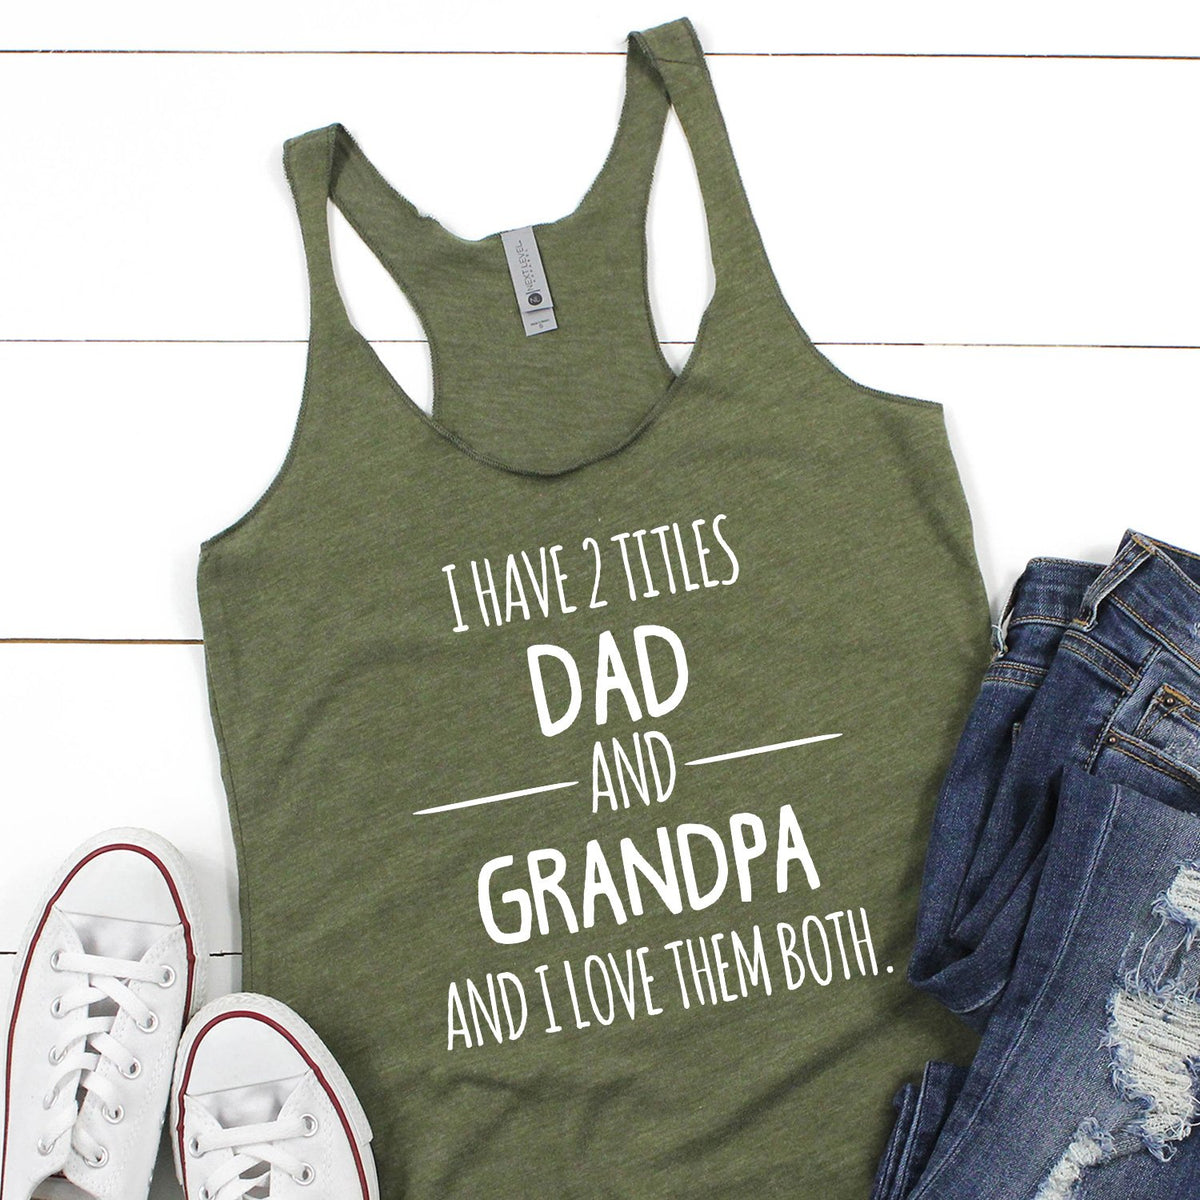 I Have 2 Titles Dad and Grandpa and I Love Them Both - Tank Top Racerback